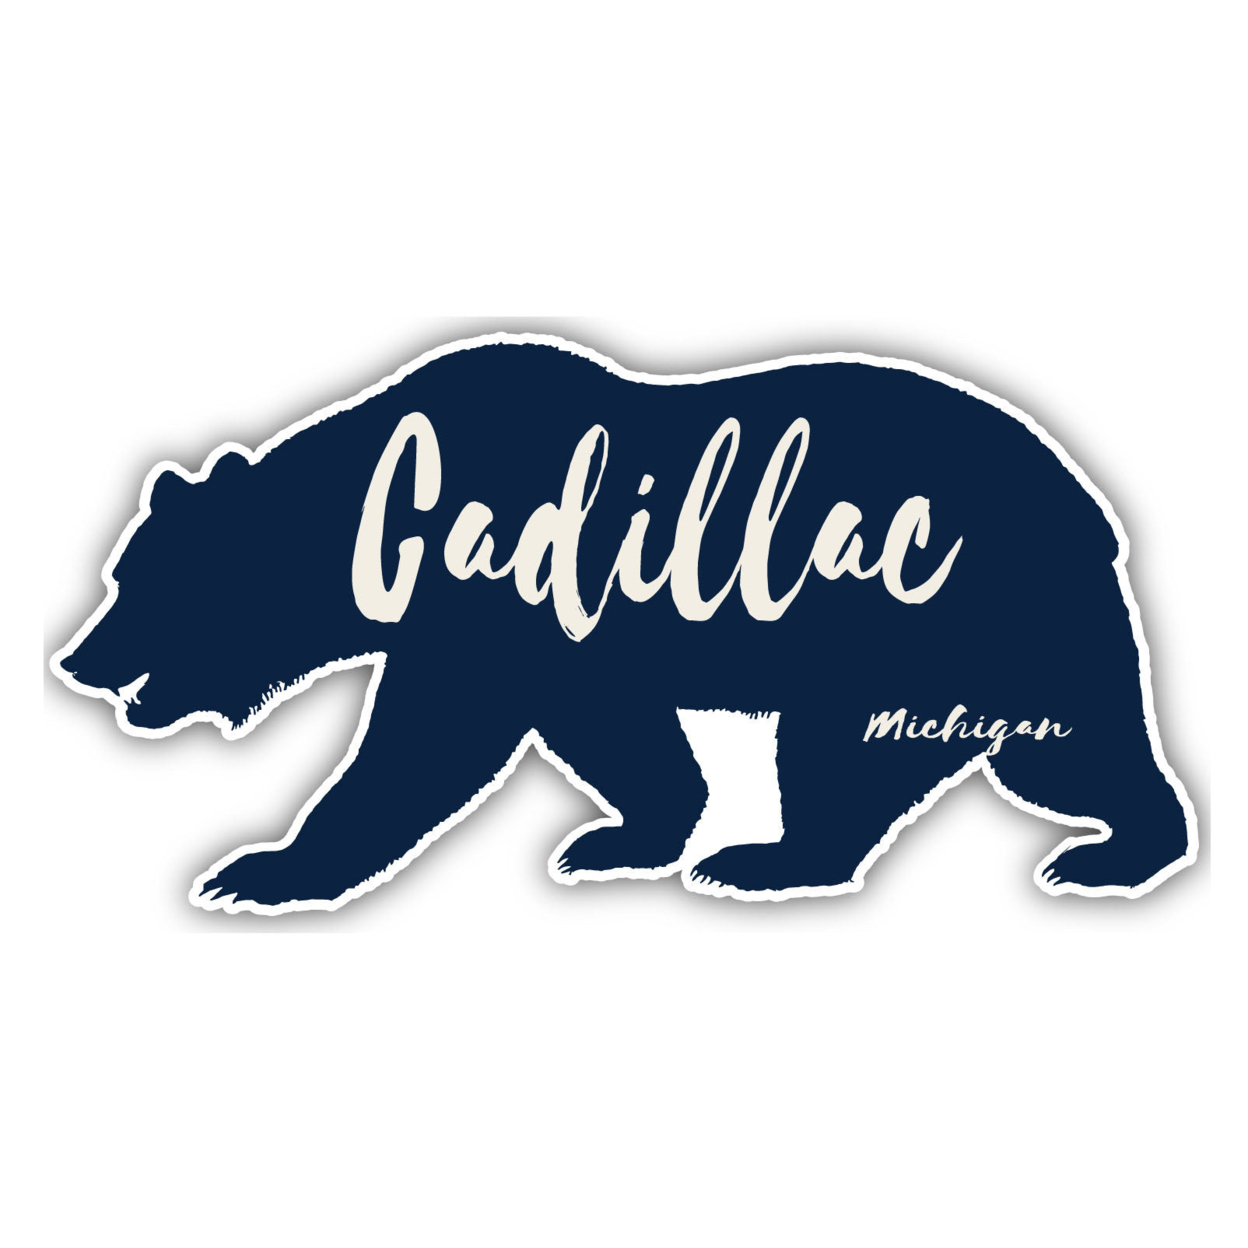 Cadillac Michigan Souvenir Decorative Stickers (Choose Theme And Size) - Single Unit, 12-Inch, Great Outdoors